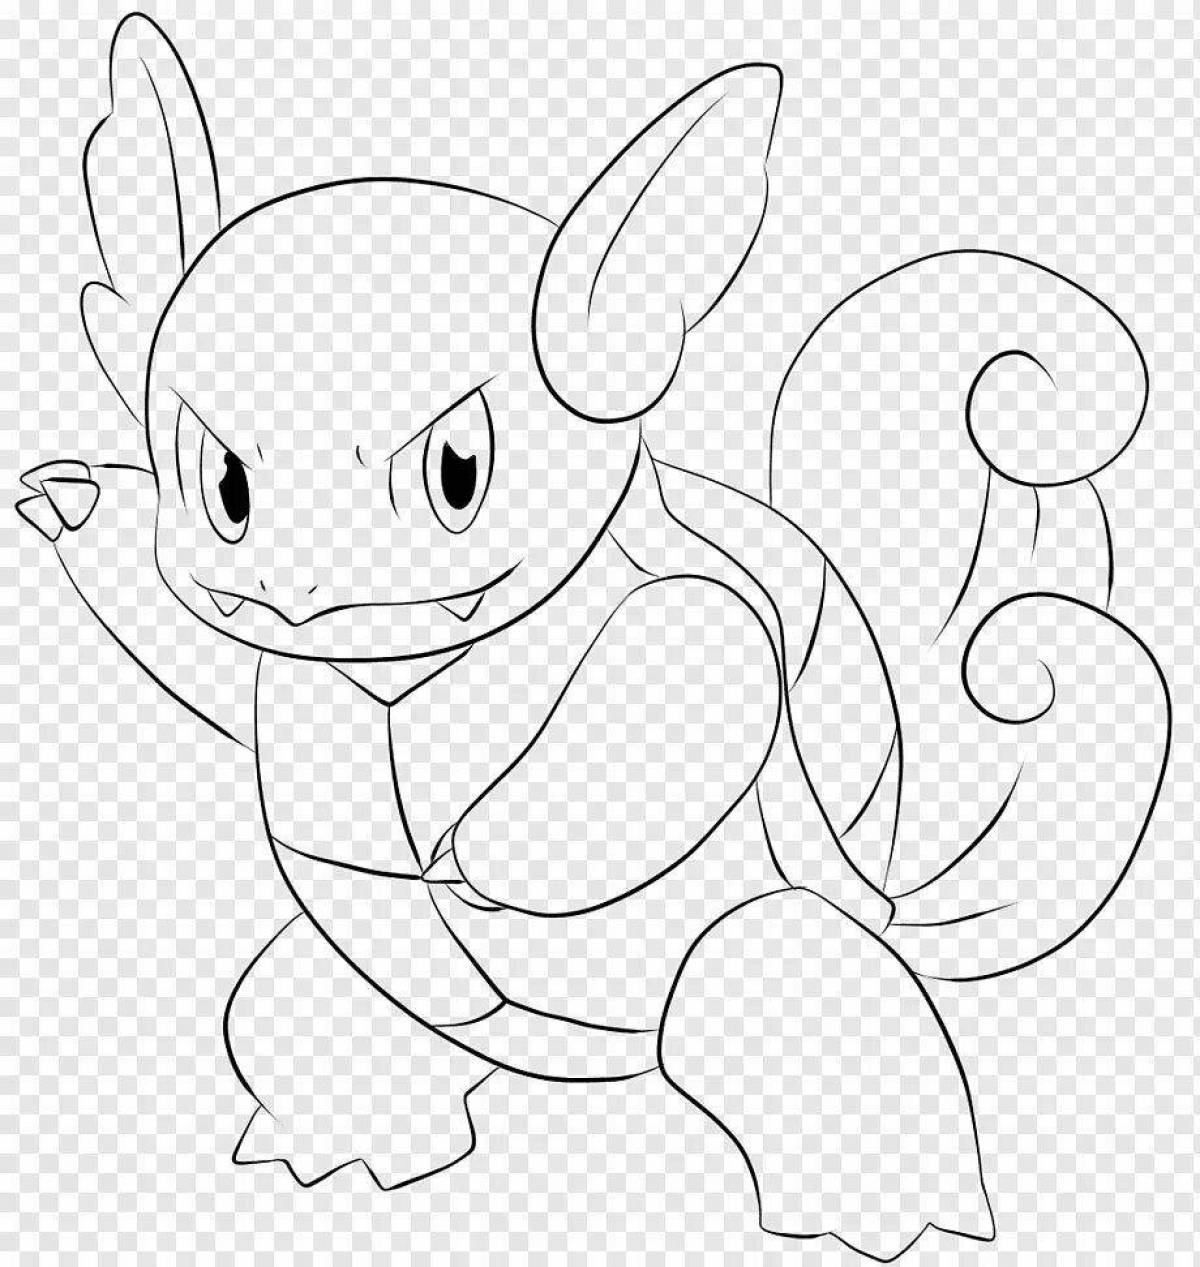 Rampant Squirtle pokemon coloring page